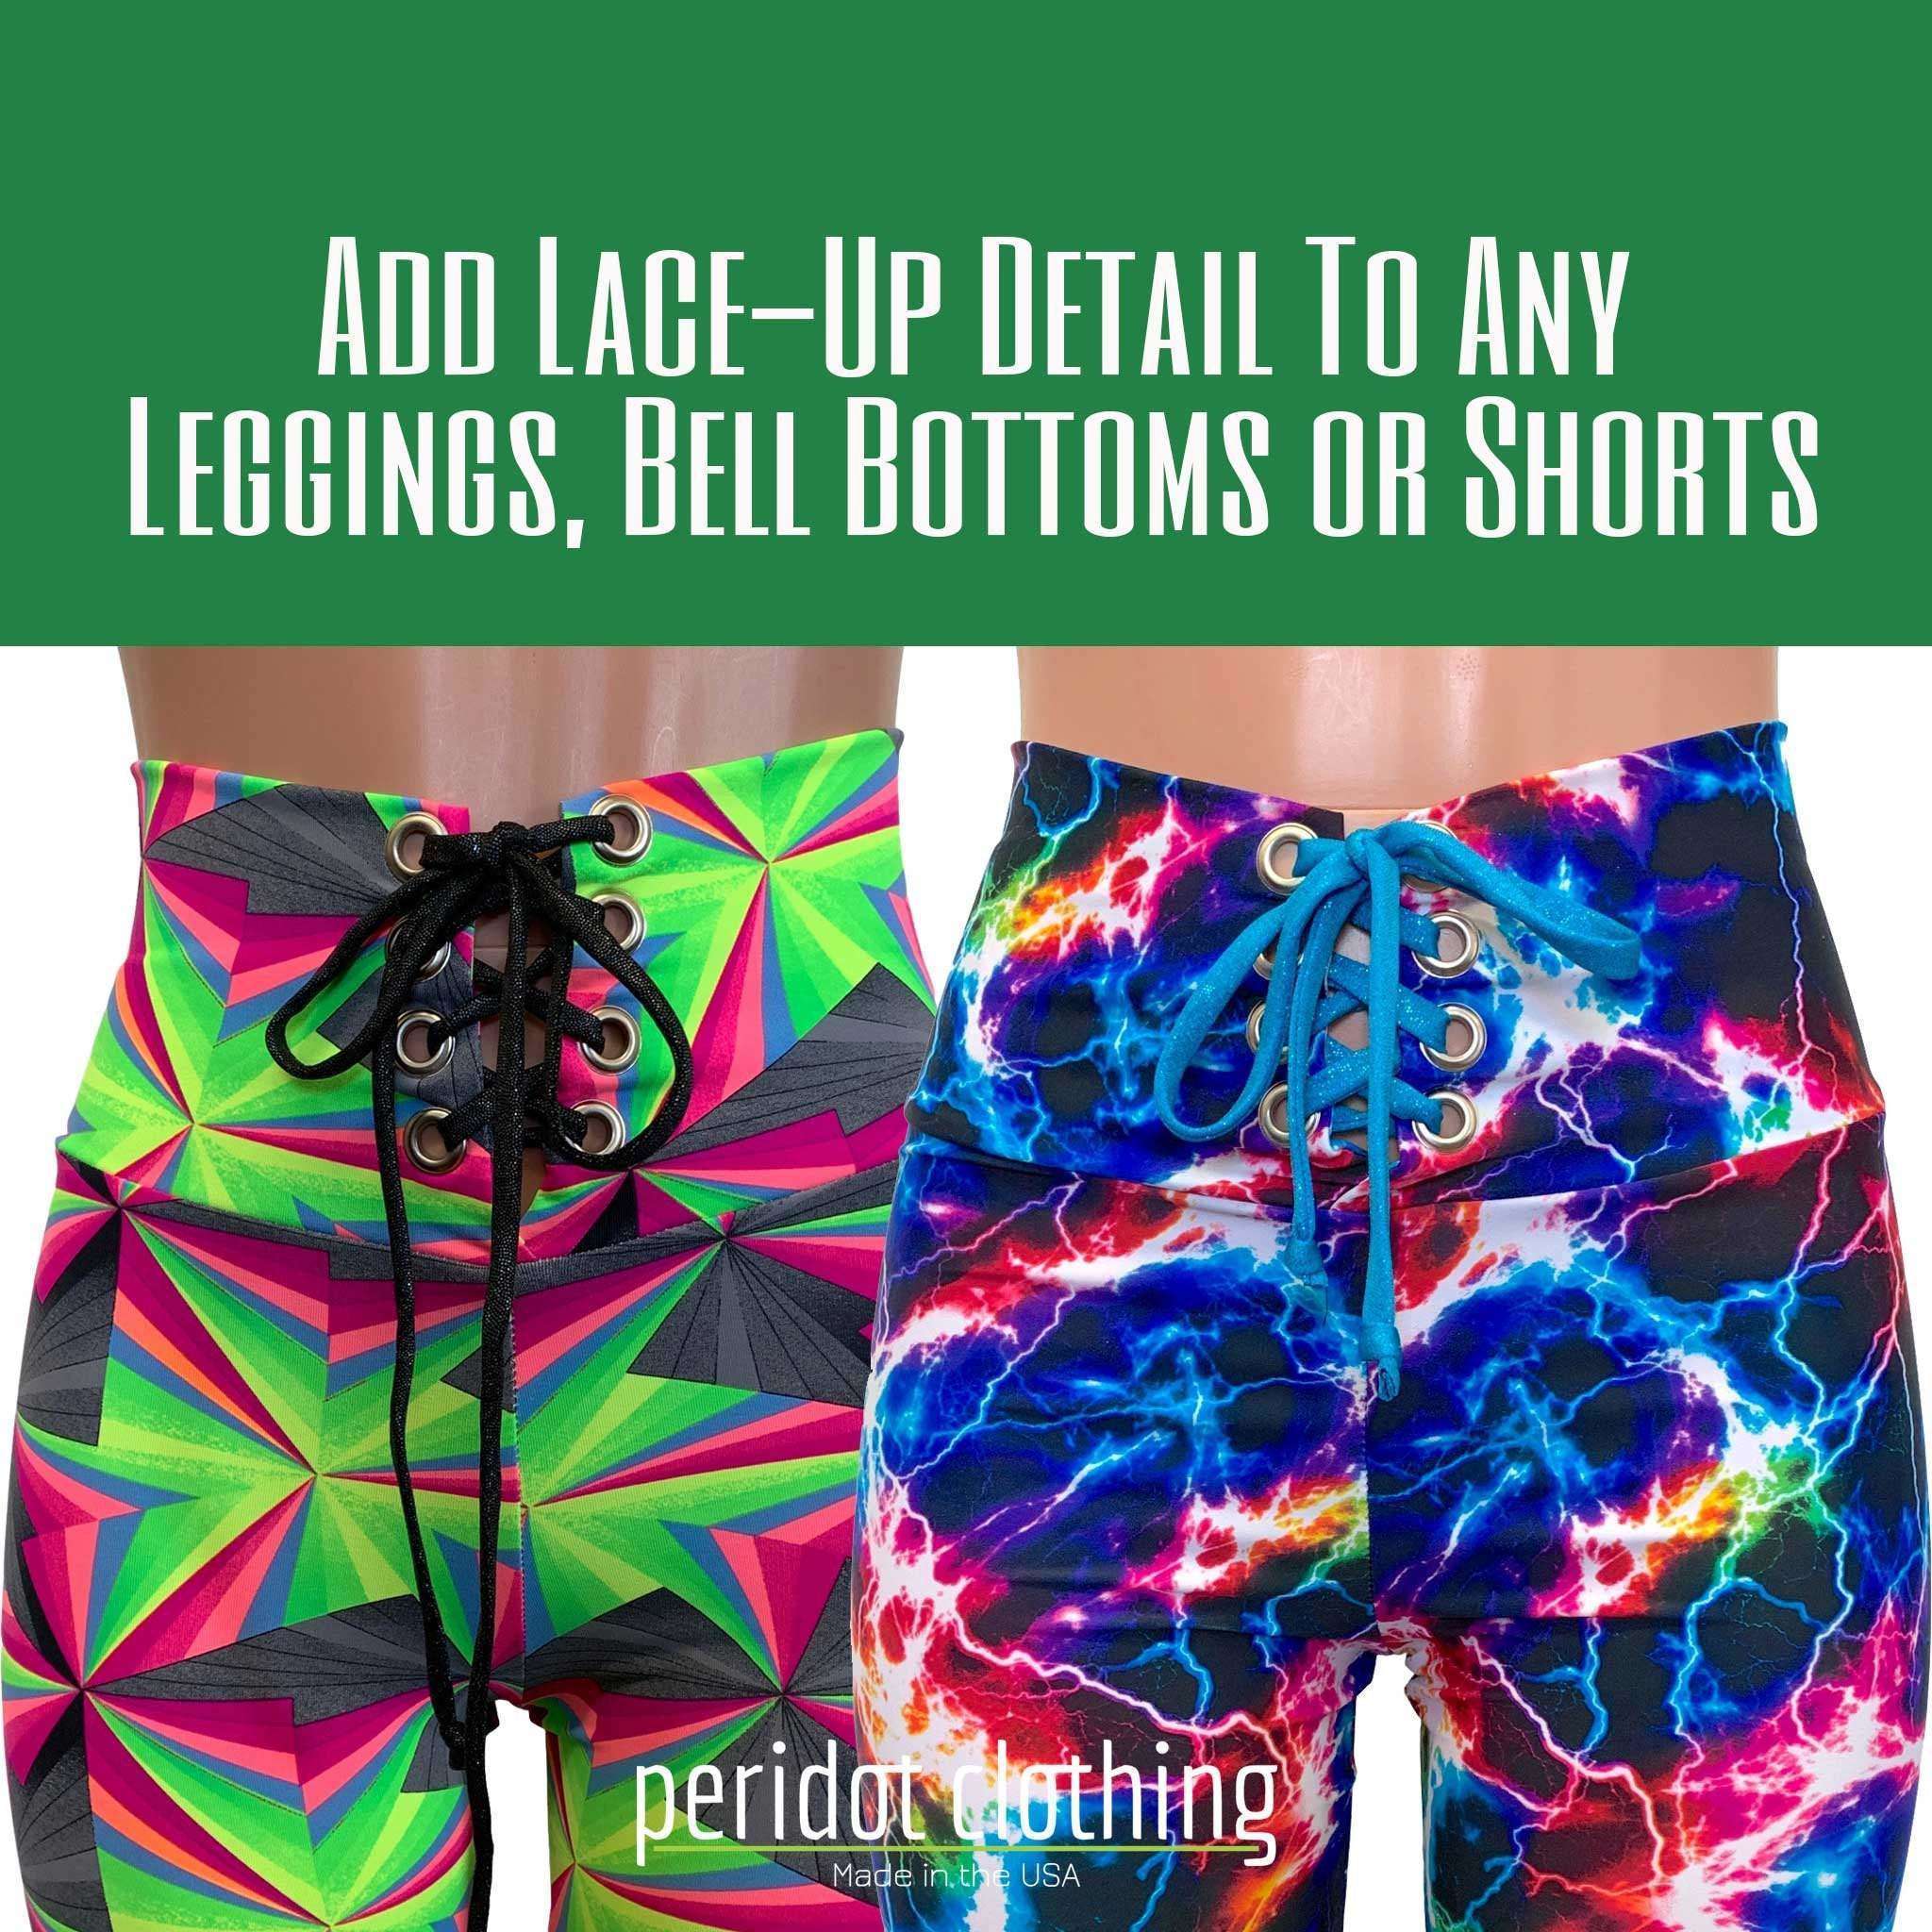 https://peridotclothing.com/cdn/shop/products/add-lace-up-detail-to-any-bell-bottoms-leggings-and-booty-shorts-in-our-shopadd-ons-22587318_367d556f-85a4-43f9-bba6-313255373244_2048x.jpg?v=1576458850